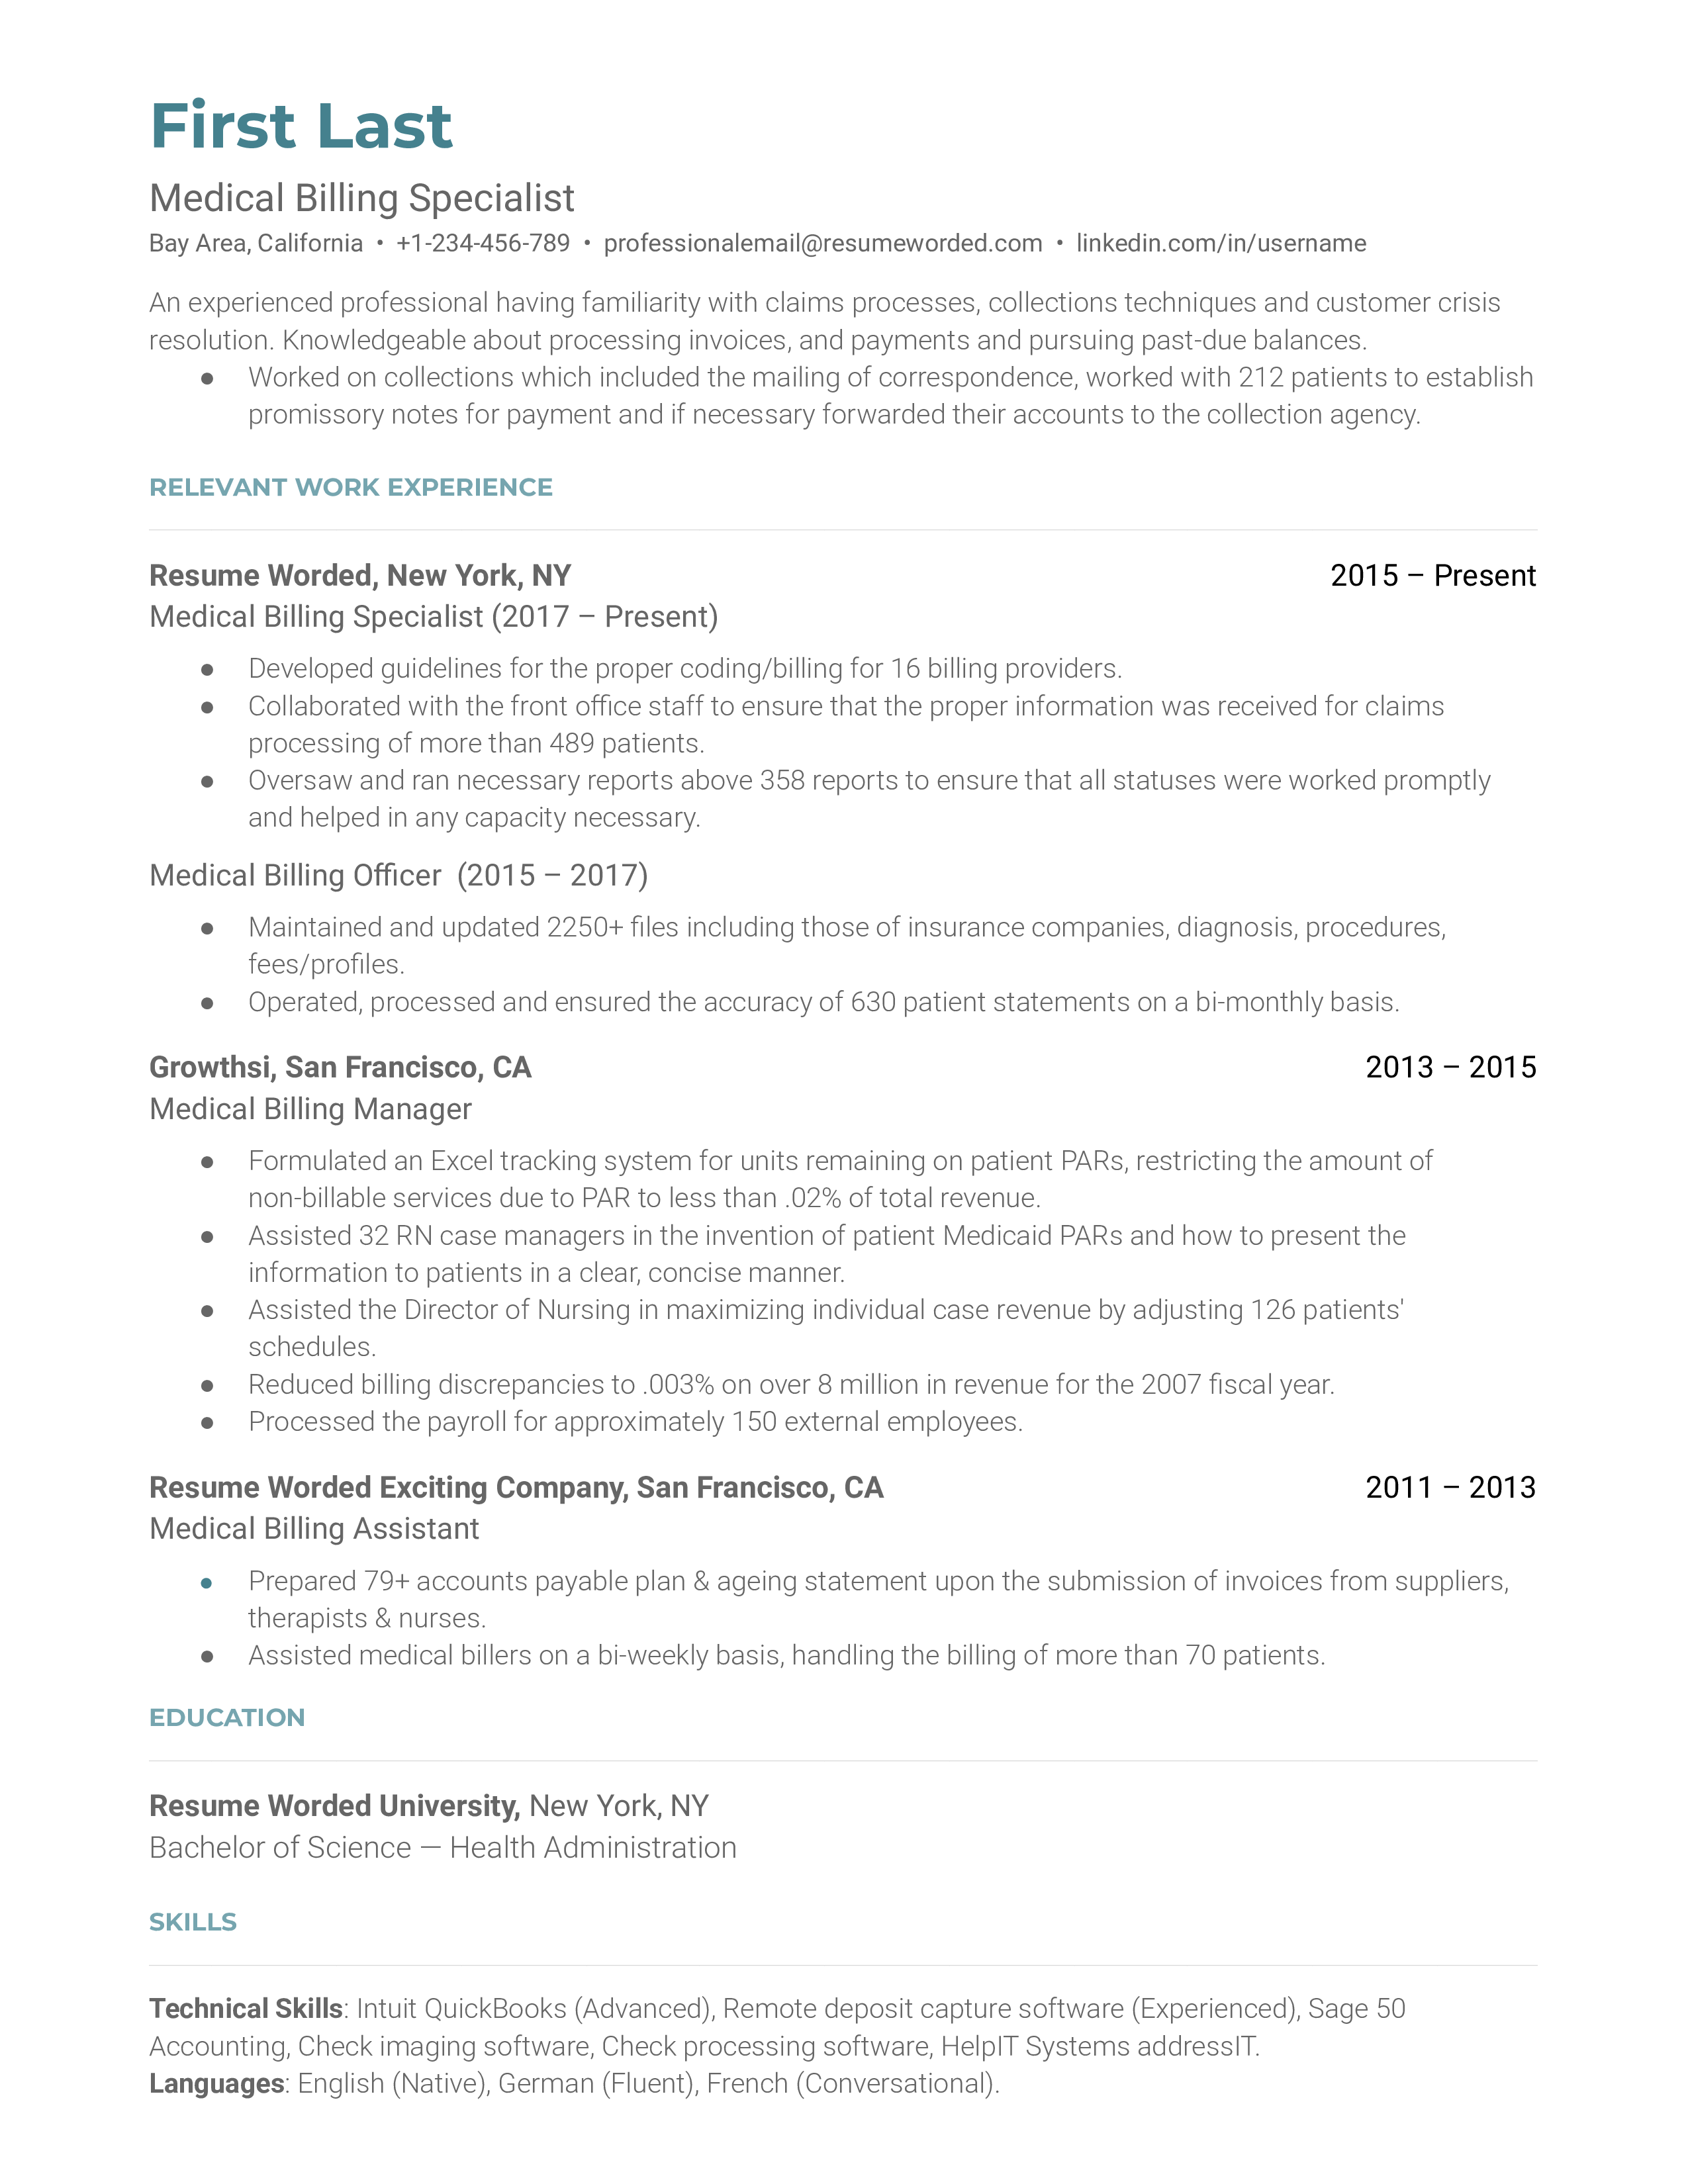 Medical Billing Specialist Resume Template + Example